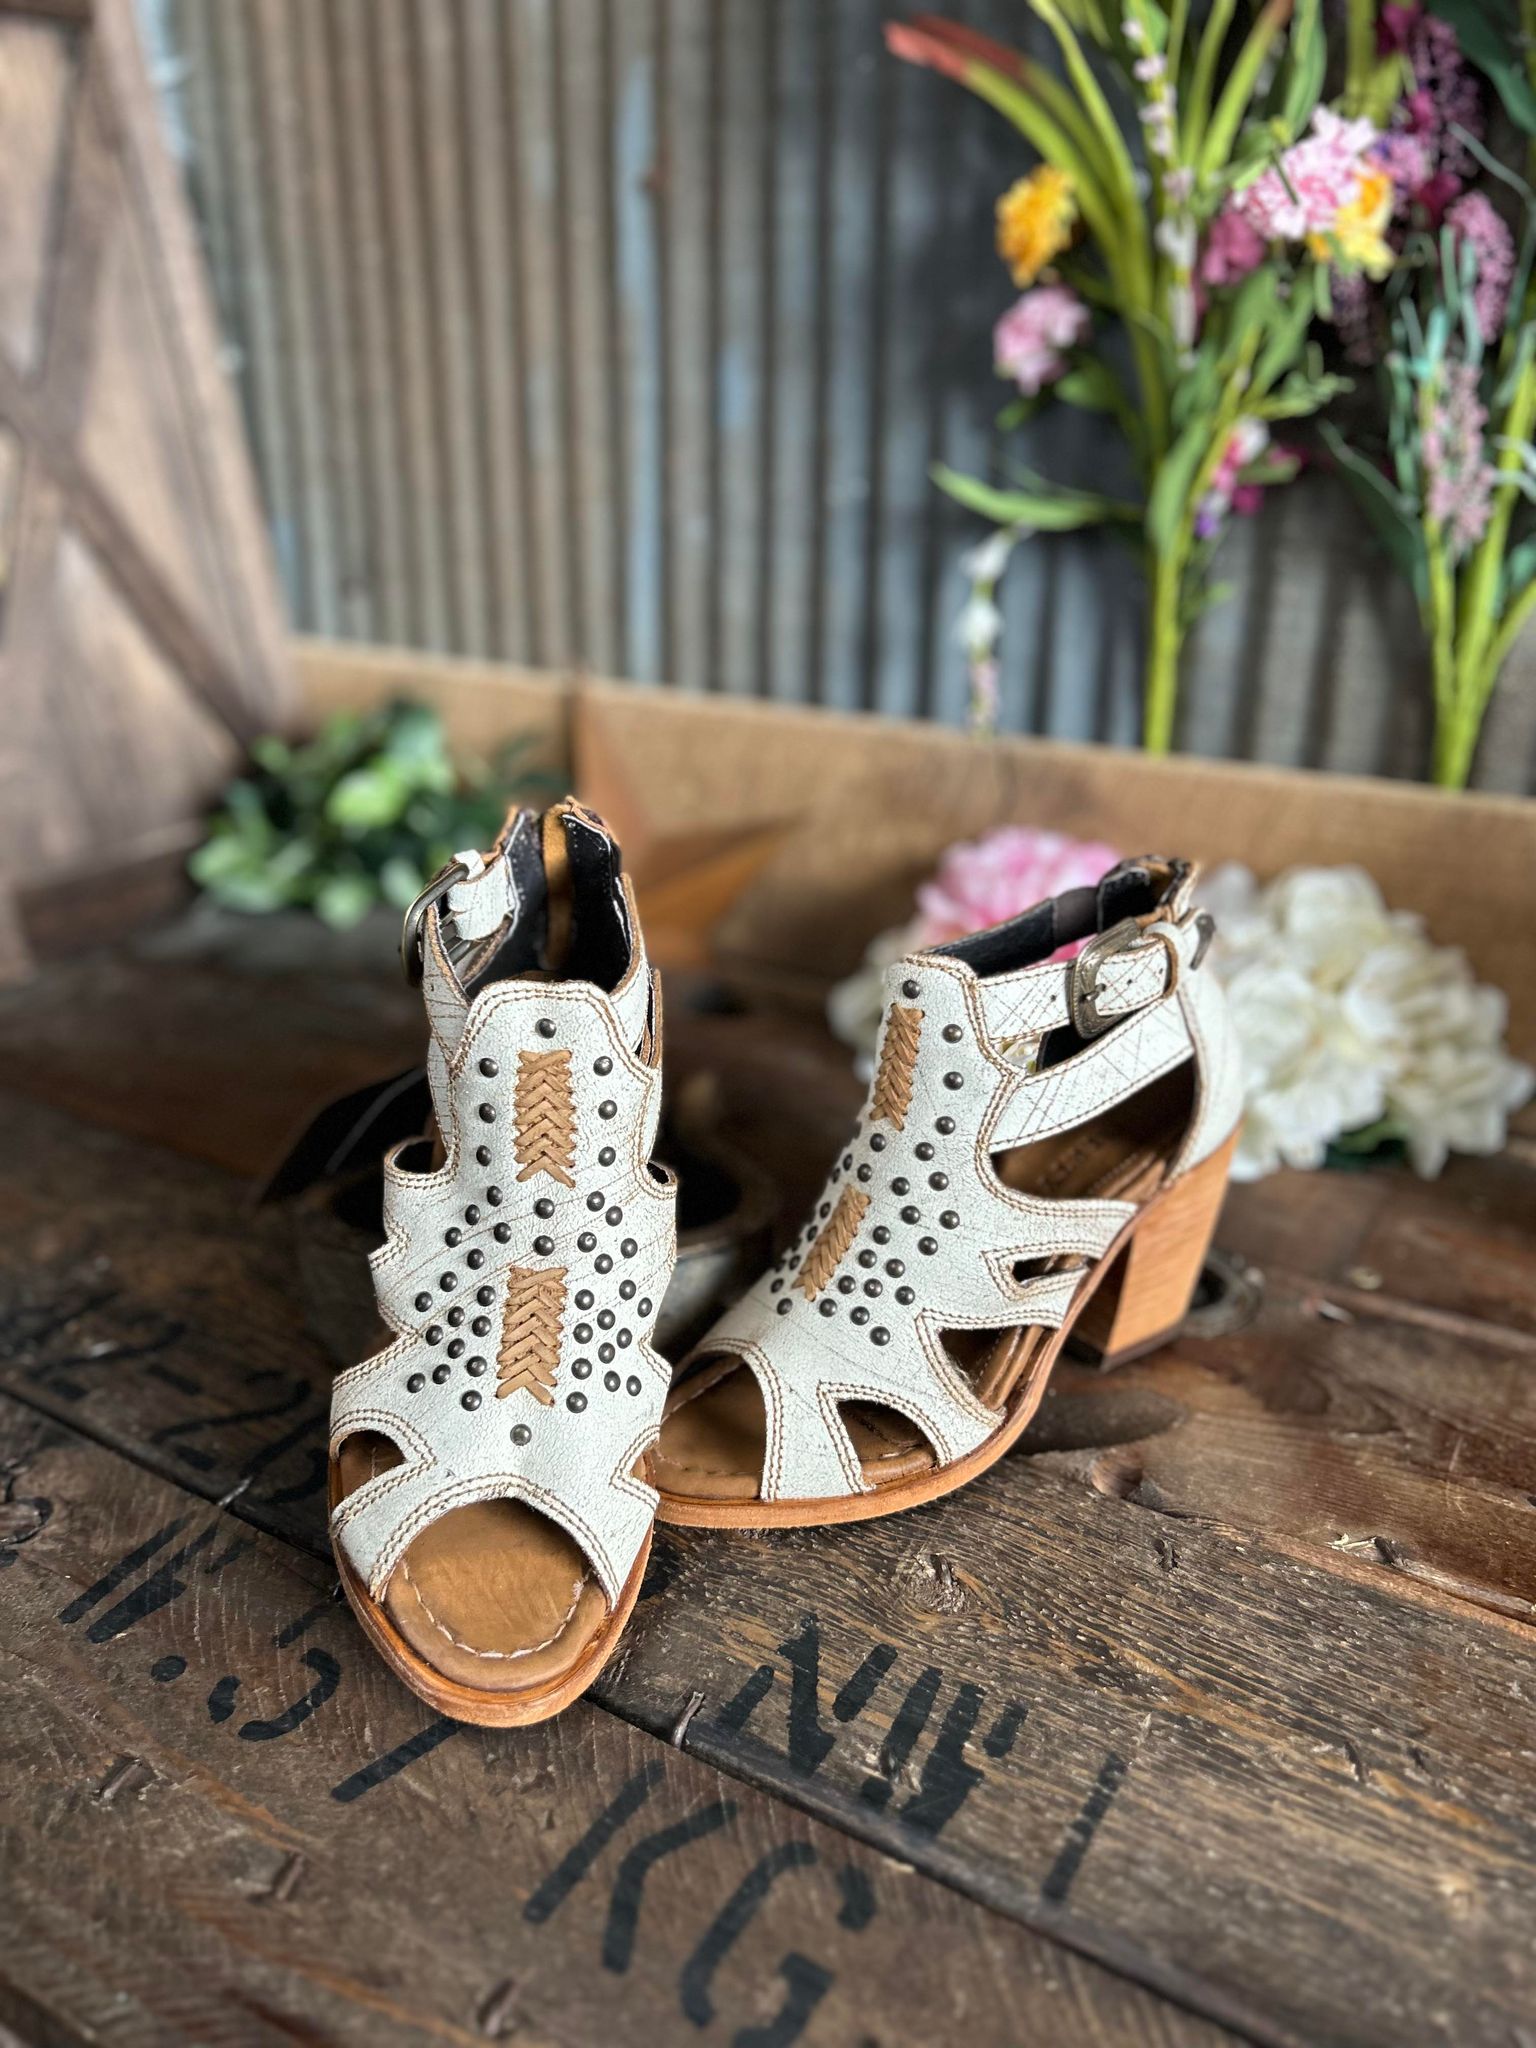 Liberty Black April Sandal-Women's Casual Shoes-Liberty Black-Lucky J Boots & More, Women's, Men's, & Kids Western Store Located in Carthage, MO